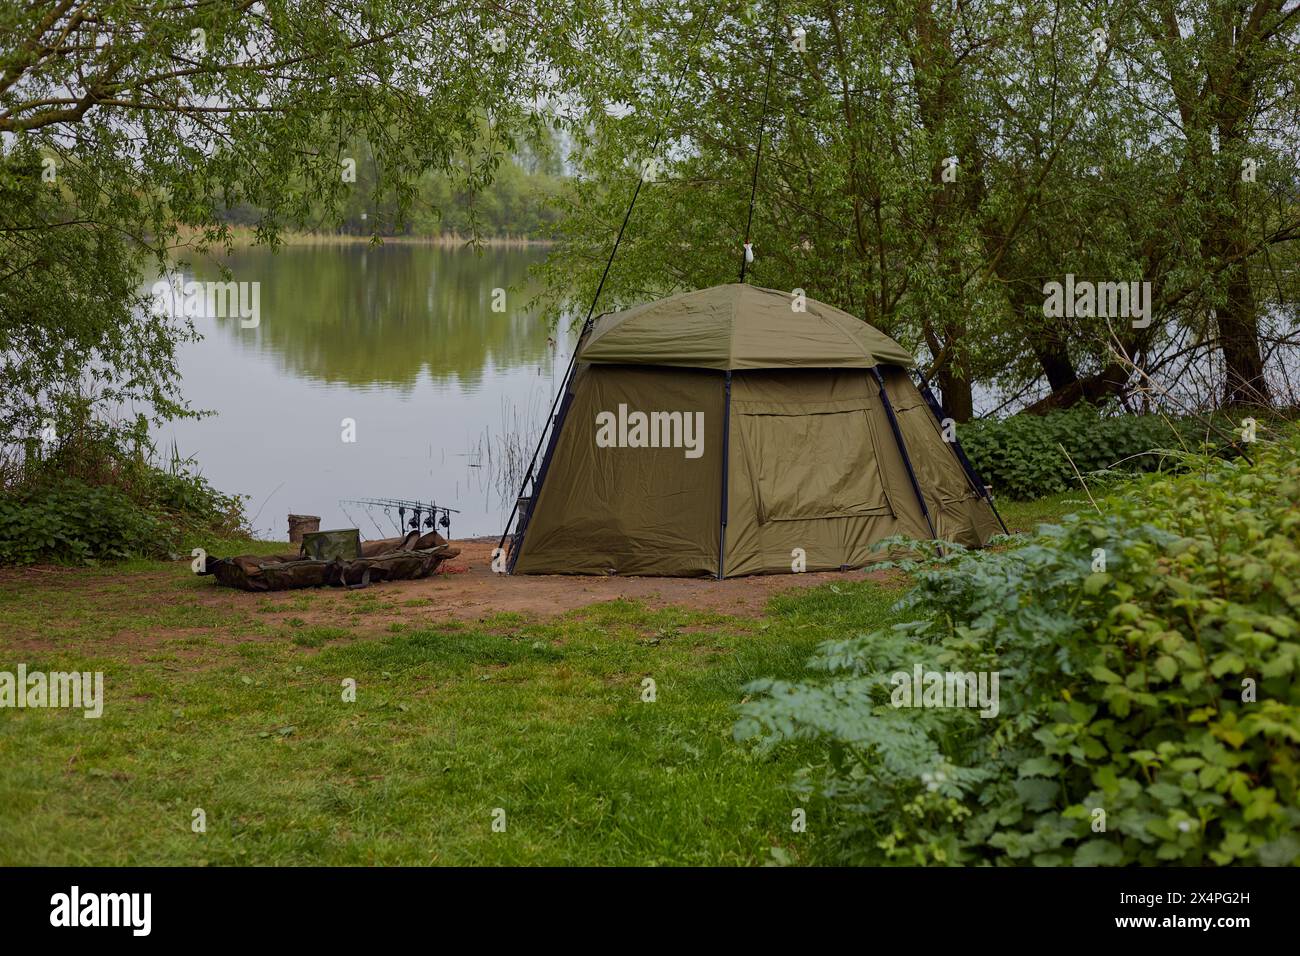 Landscape image of a lake and surrounding trees with a fisherman's shelter and equipment in the fore ground. Stock Photo